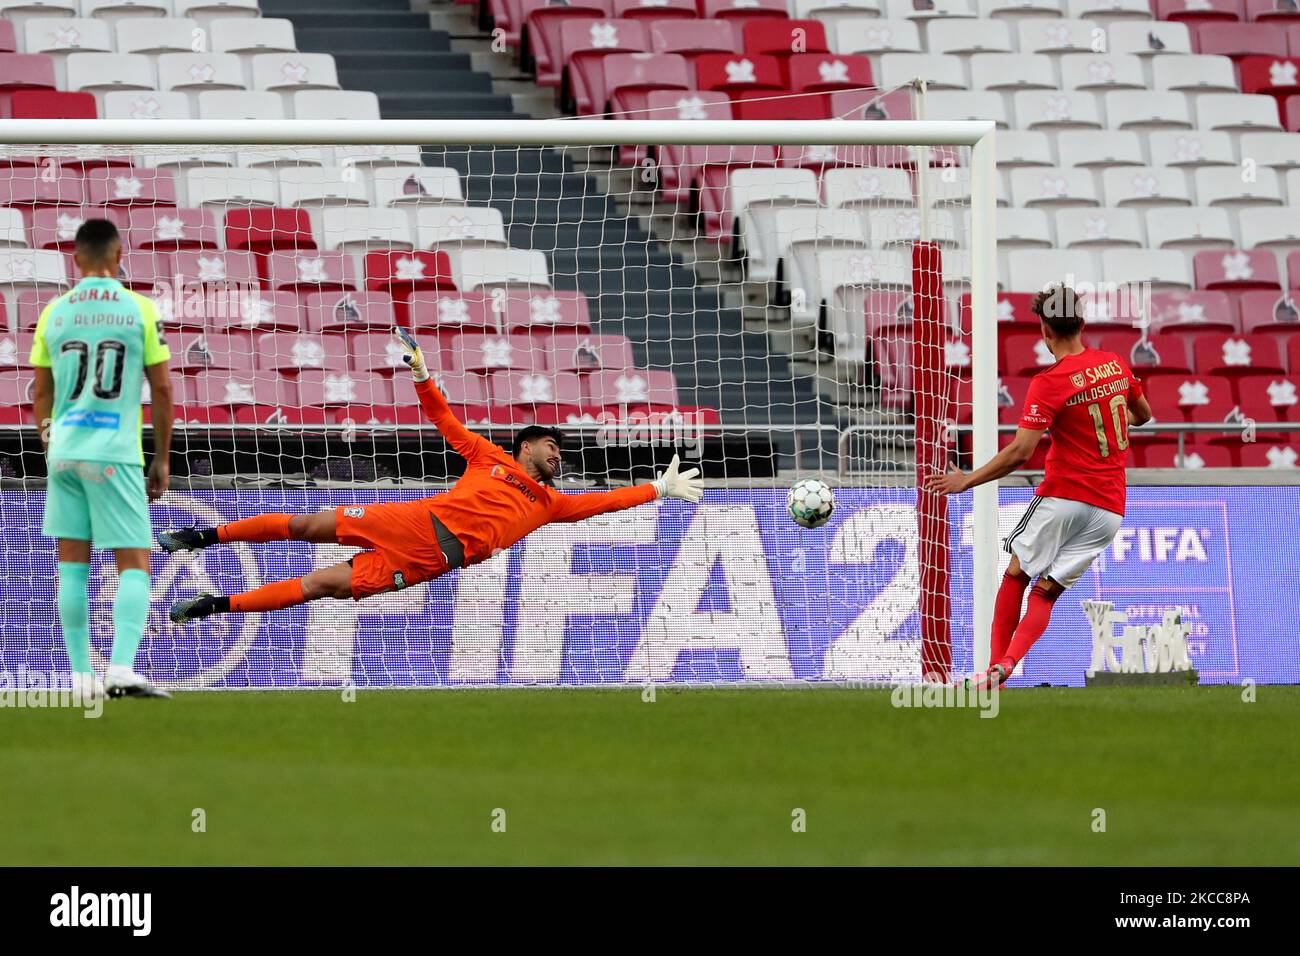 Luca Waldschmidt of SL Benfica shoots to score a penalty during the Portuguese League football match between SL Benfica and CS Maritimo at the Luz stadium in Lisbon, Portugal on April 5, 2021. (Photo by Pedro FiÃºza/NurPhoto) Stock Photo